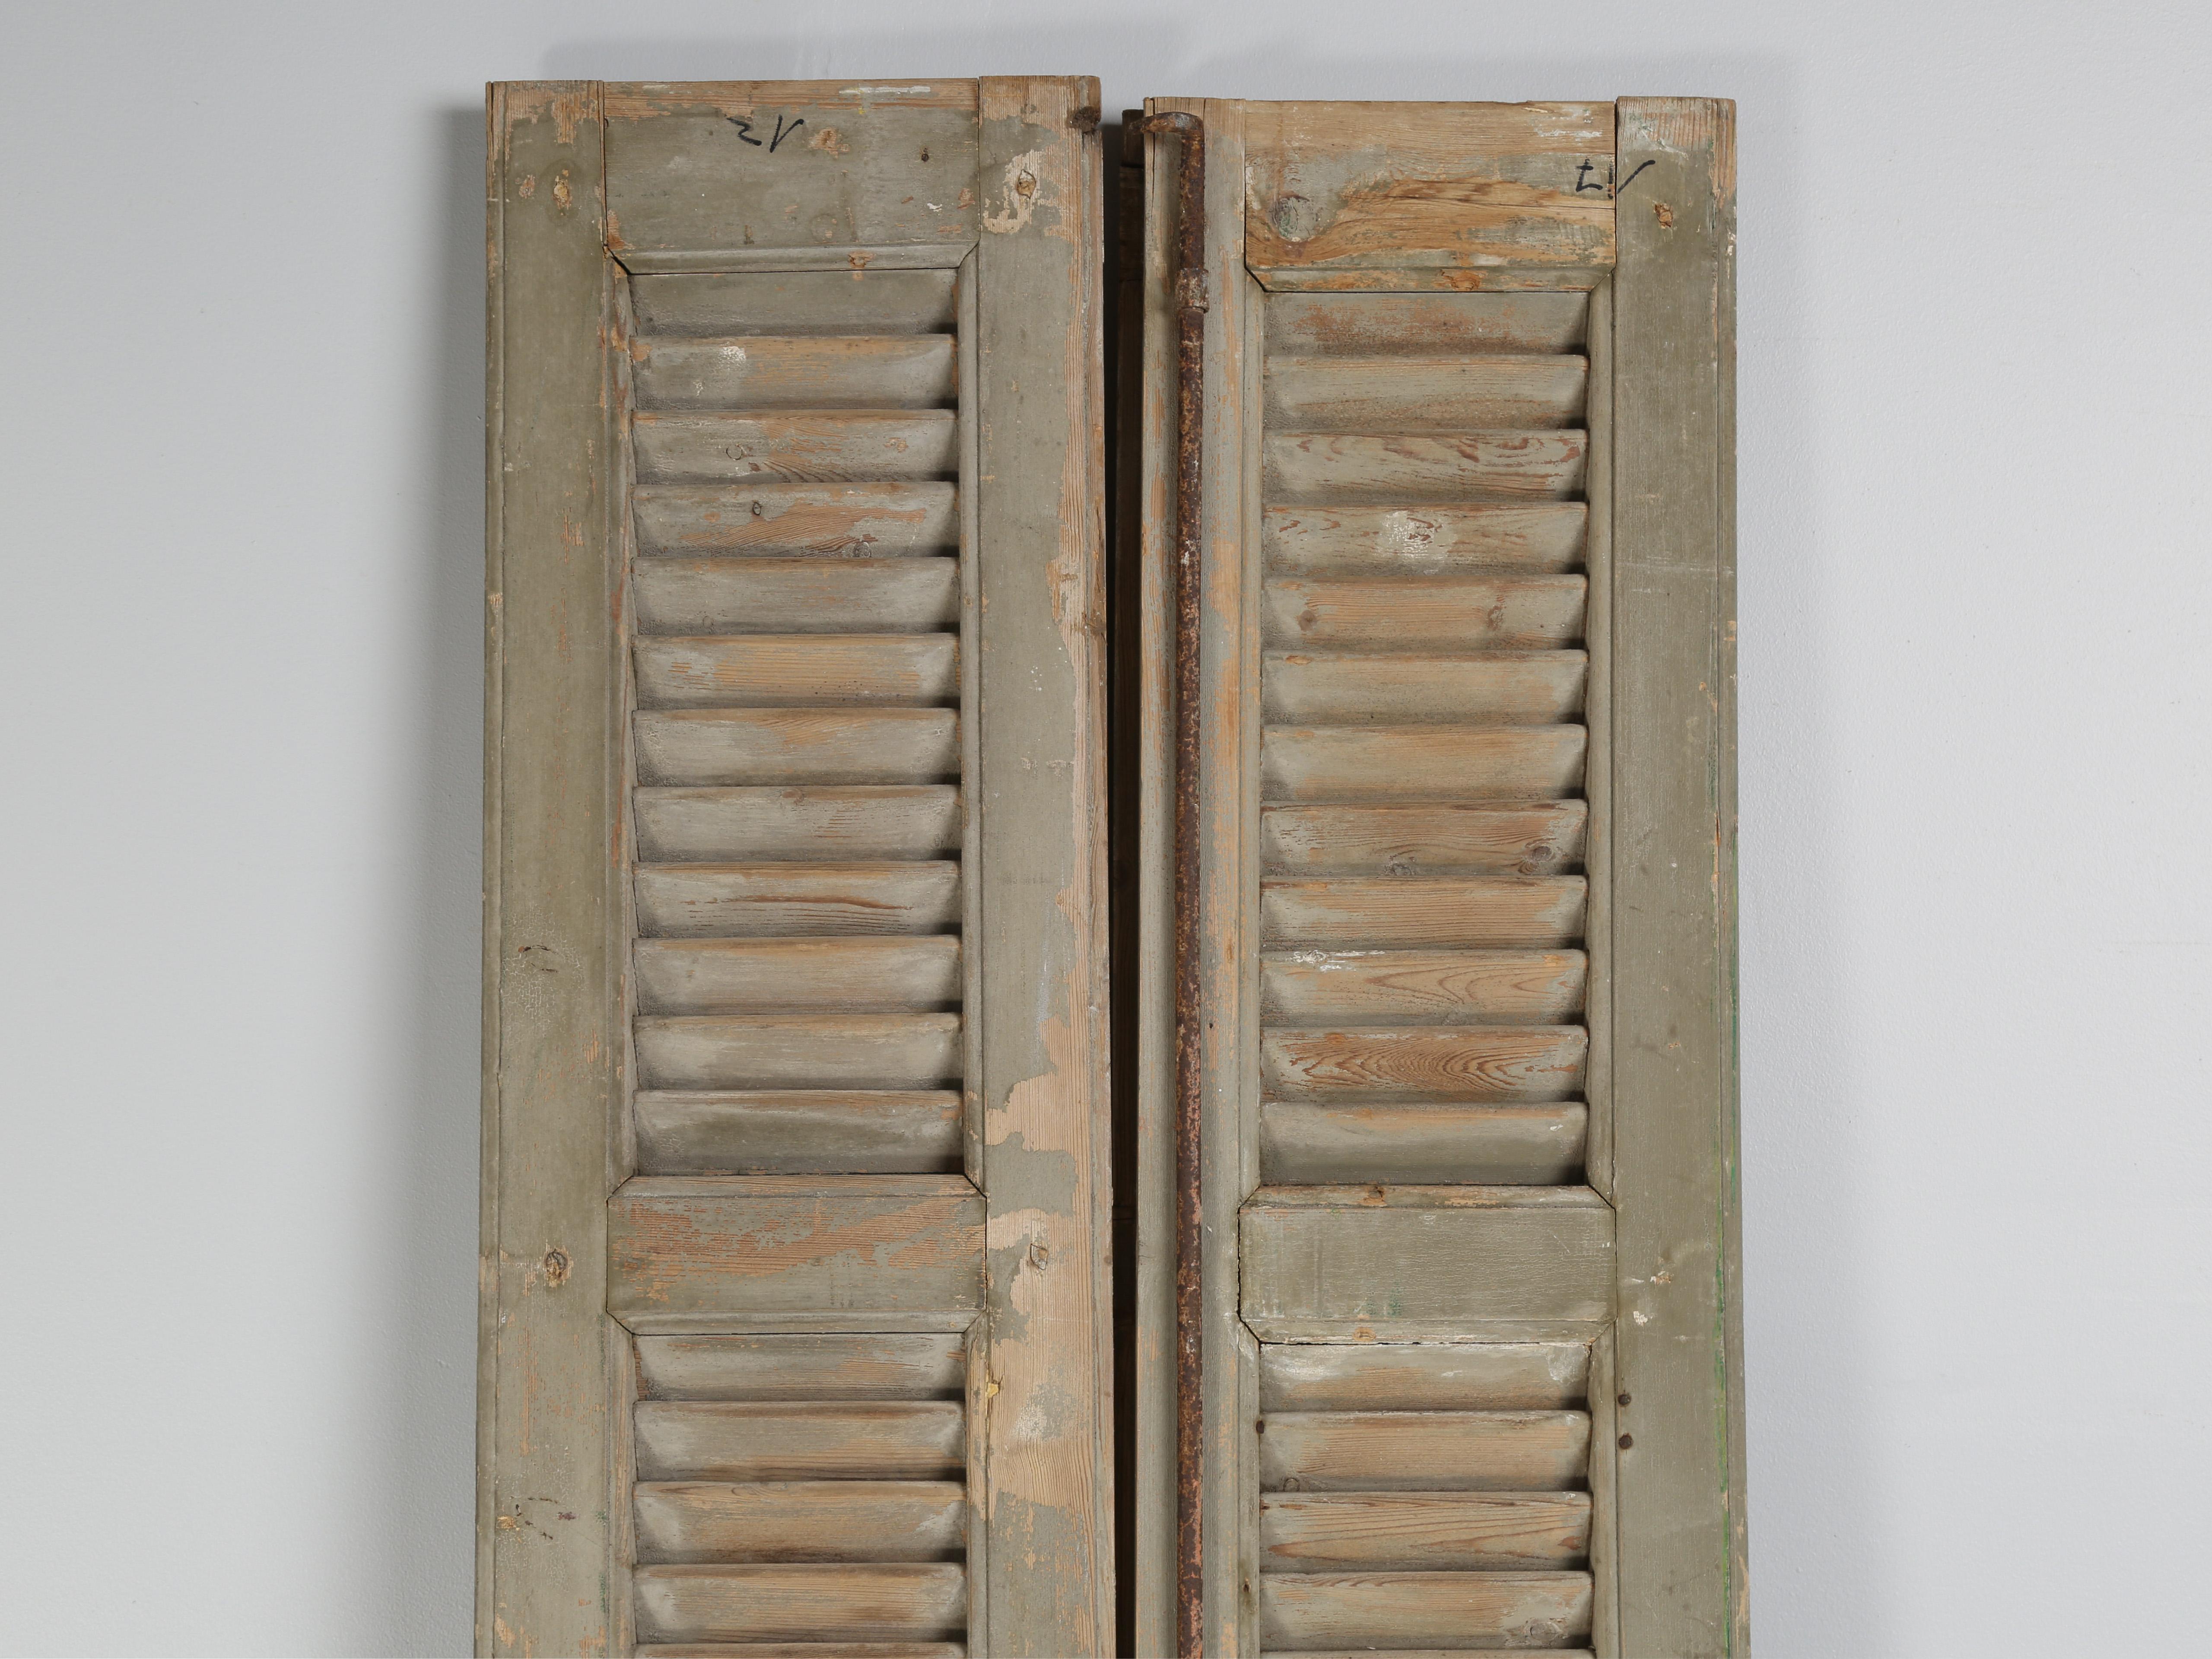 Antique pair of French shutters in very old paint removed a long time ago from a chateau located in Brittany. 
**Width provided is for the wider shutter. The other shutter is 11.13